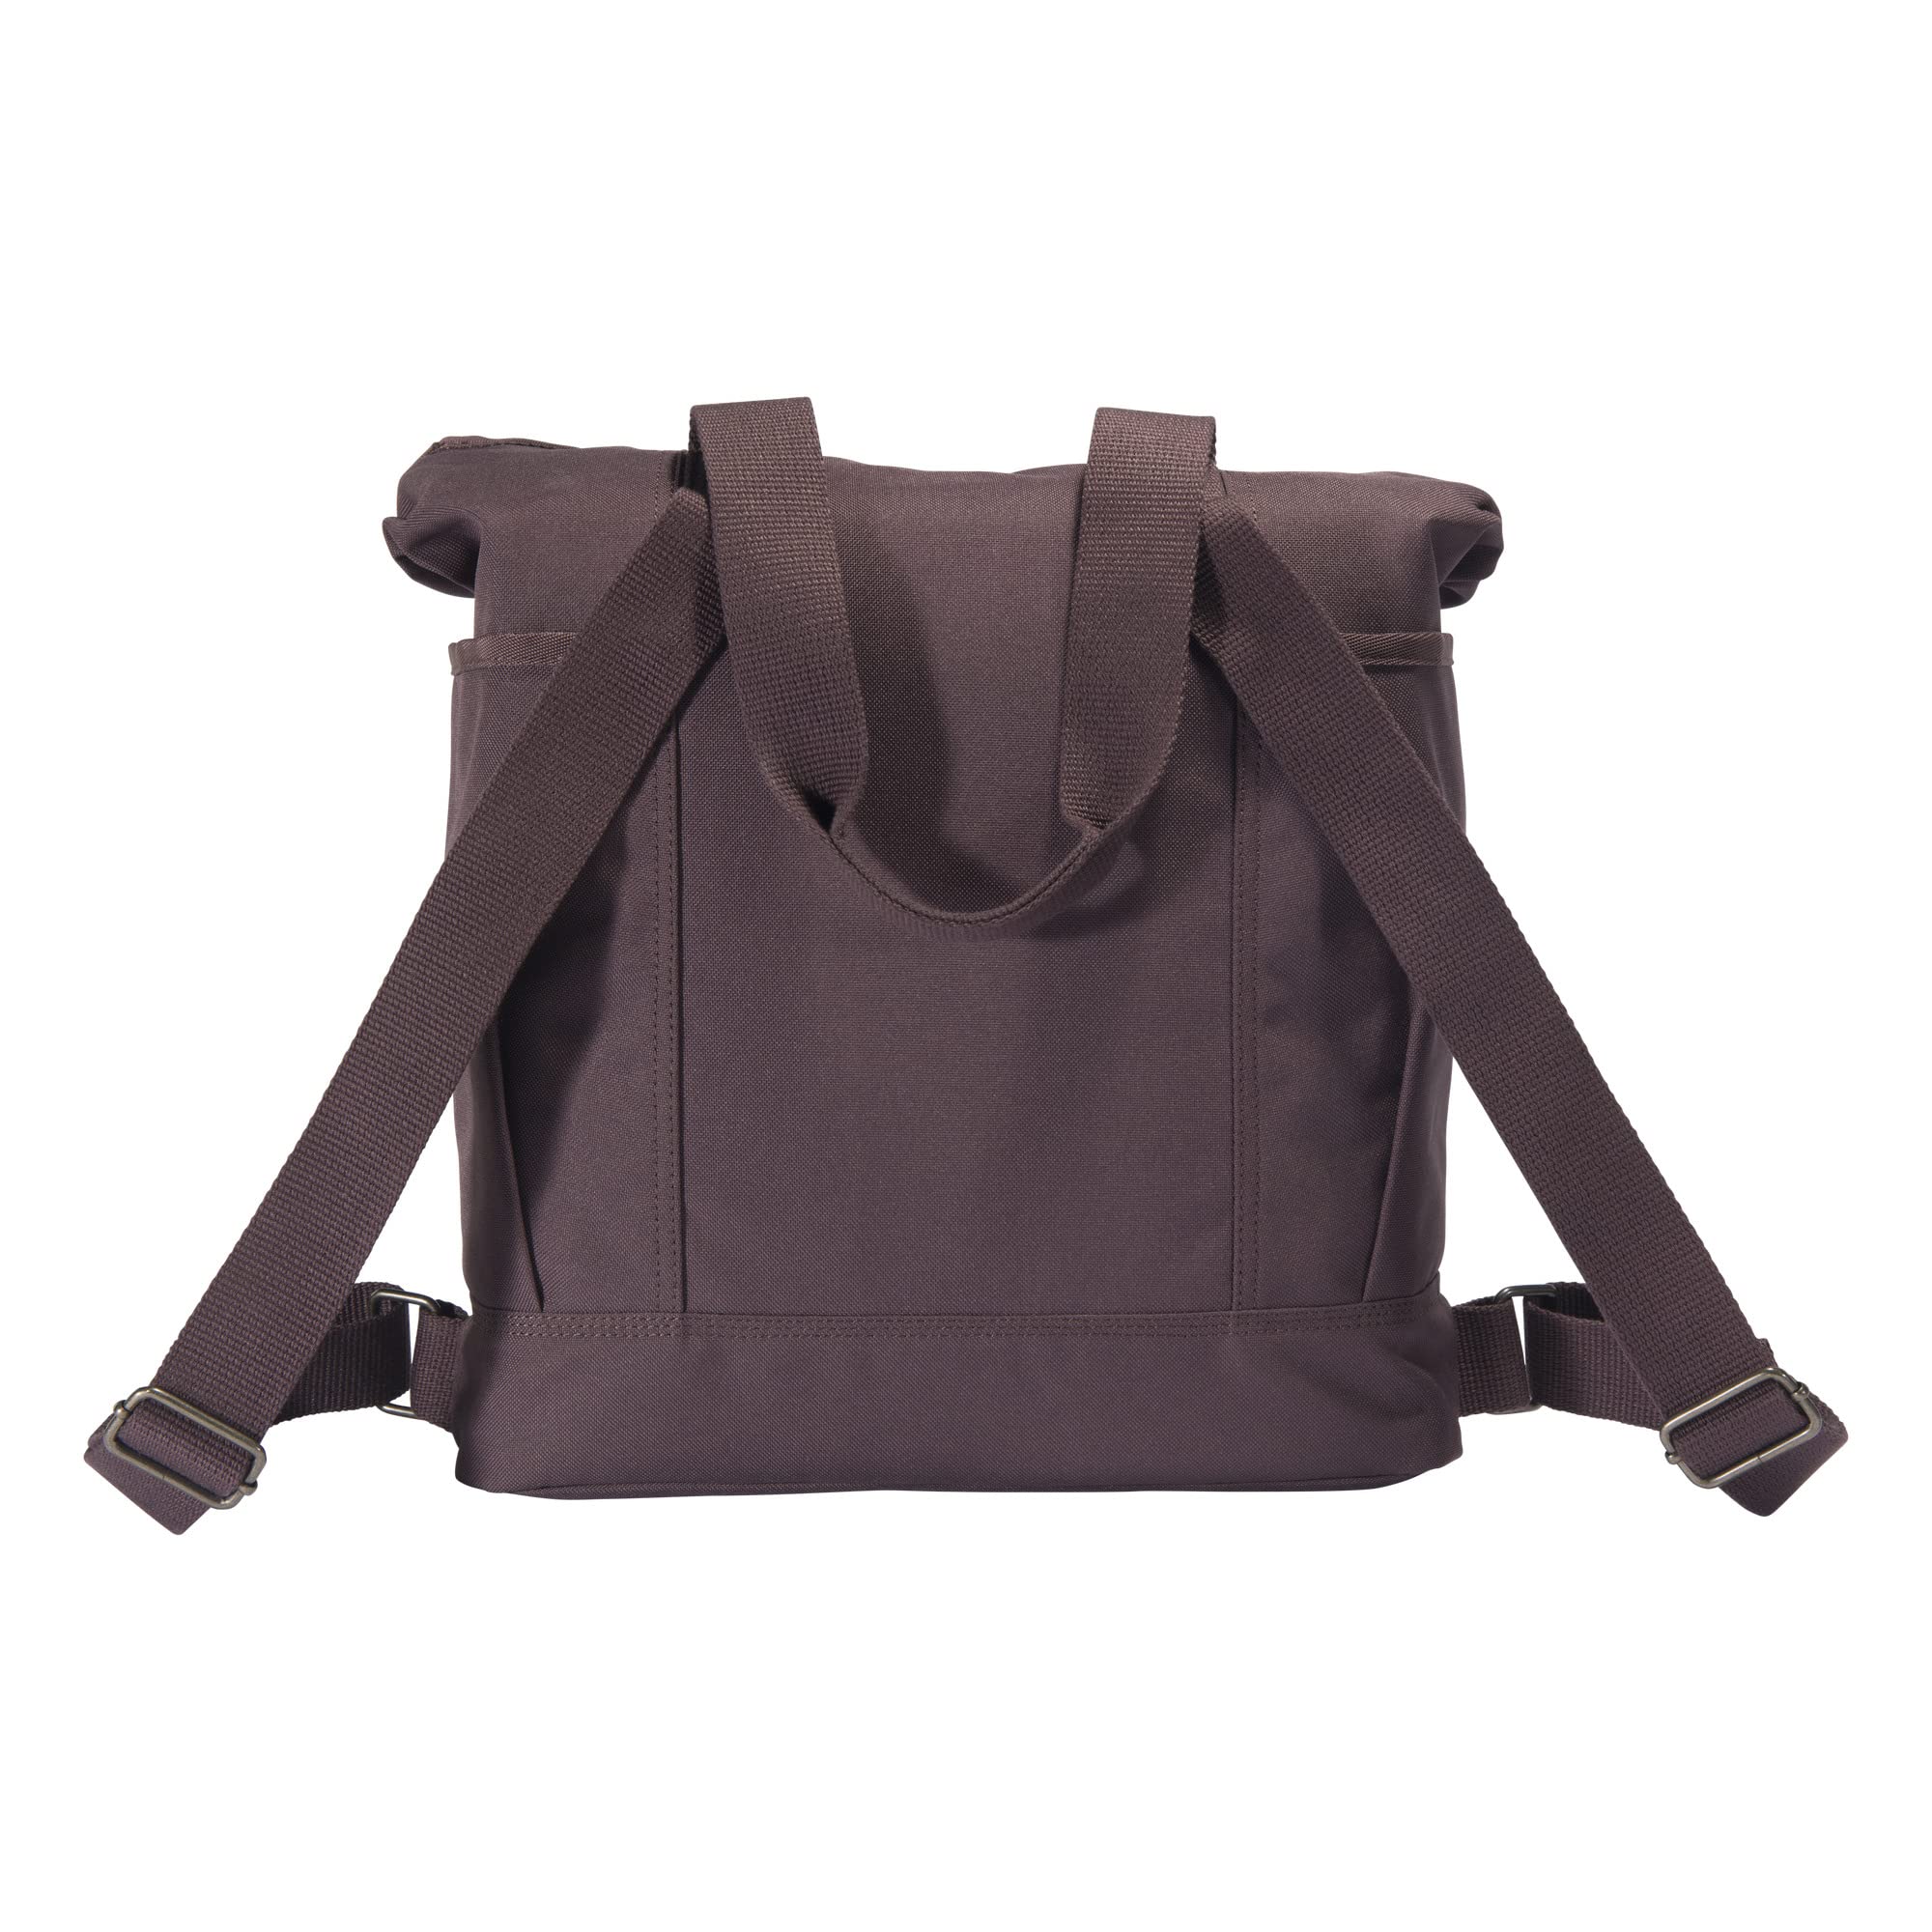 Carhartt Convertible, Durable Tote Bag with Adjustable Backpack Straps and Laptop Sleeve, Wine, One Size